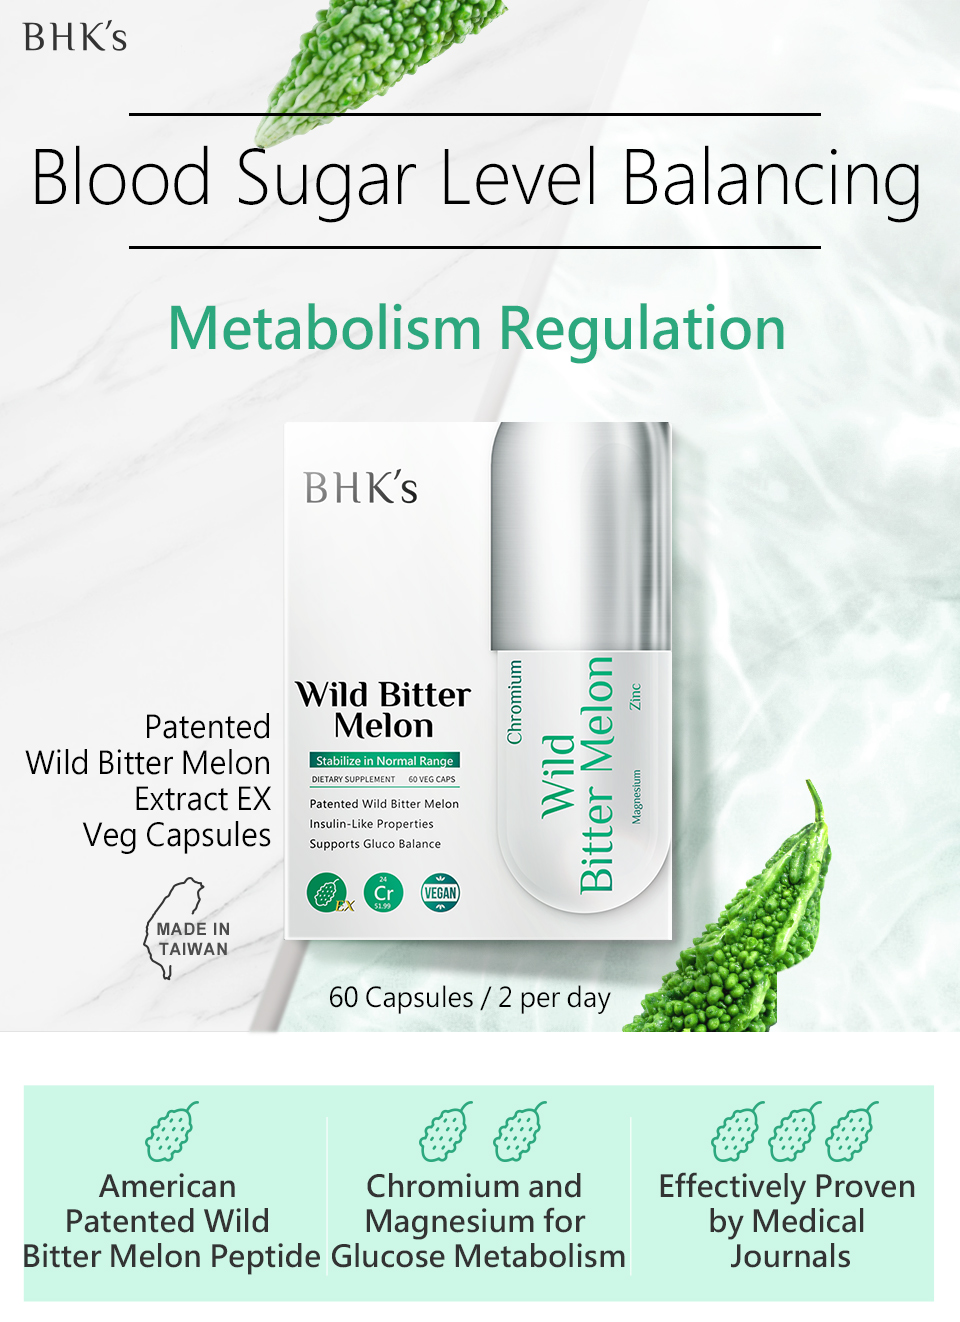 BHK's wild bitter melon decreases in blood glucose and appetite suppression